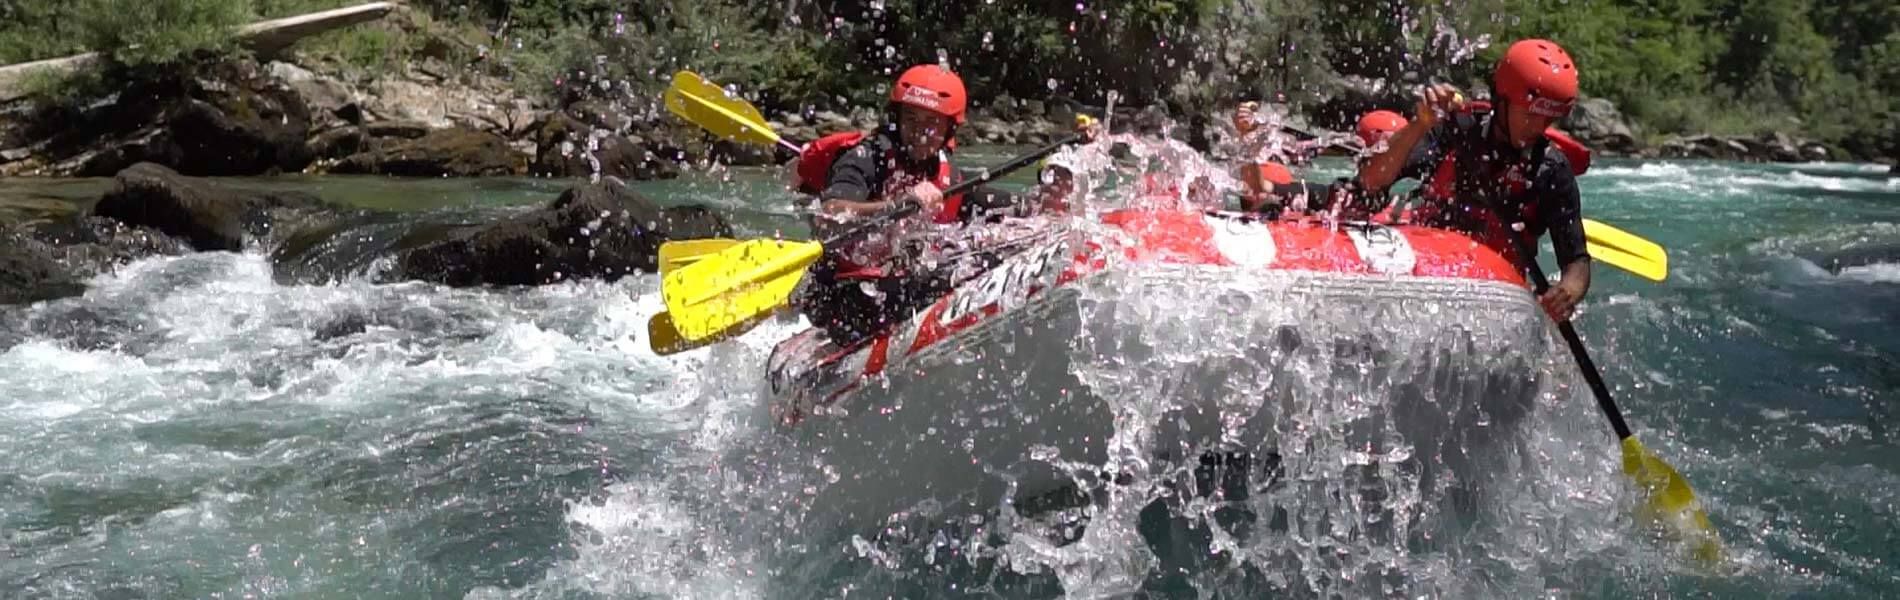 RAFTING TOURS GALLERY